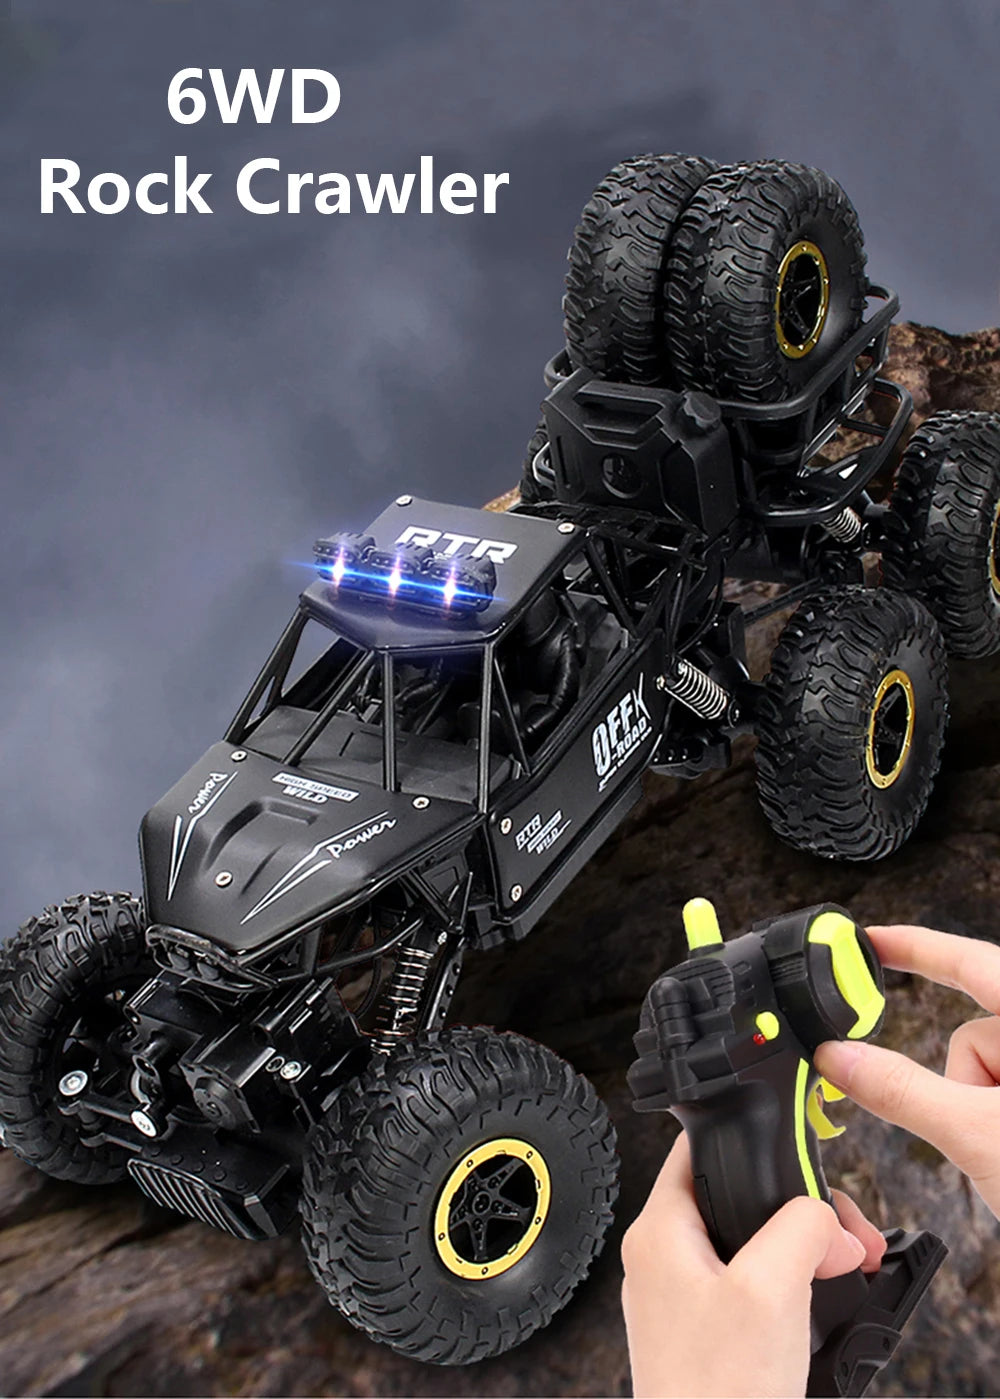 the model 5514 is 4WD rock crawler rc car, it is with real